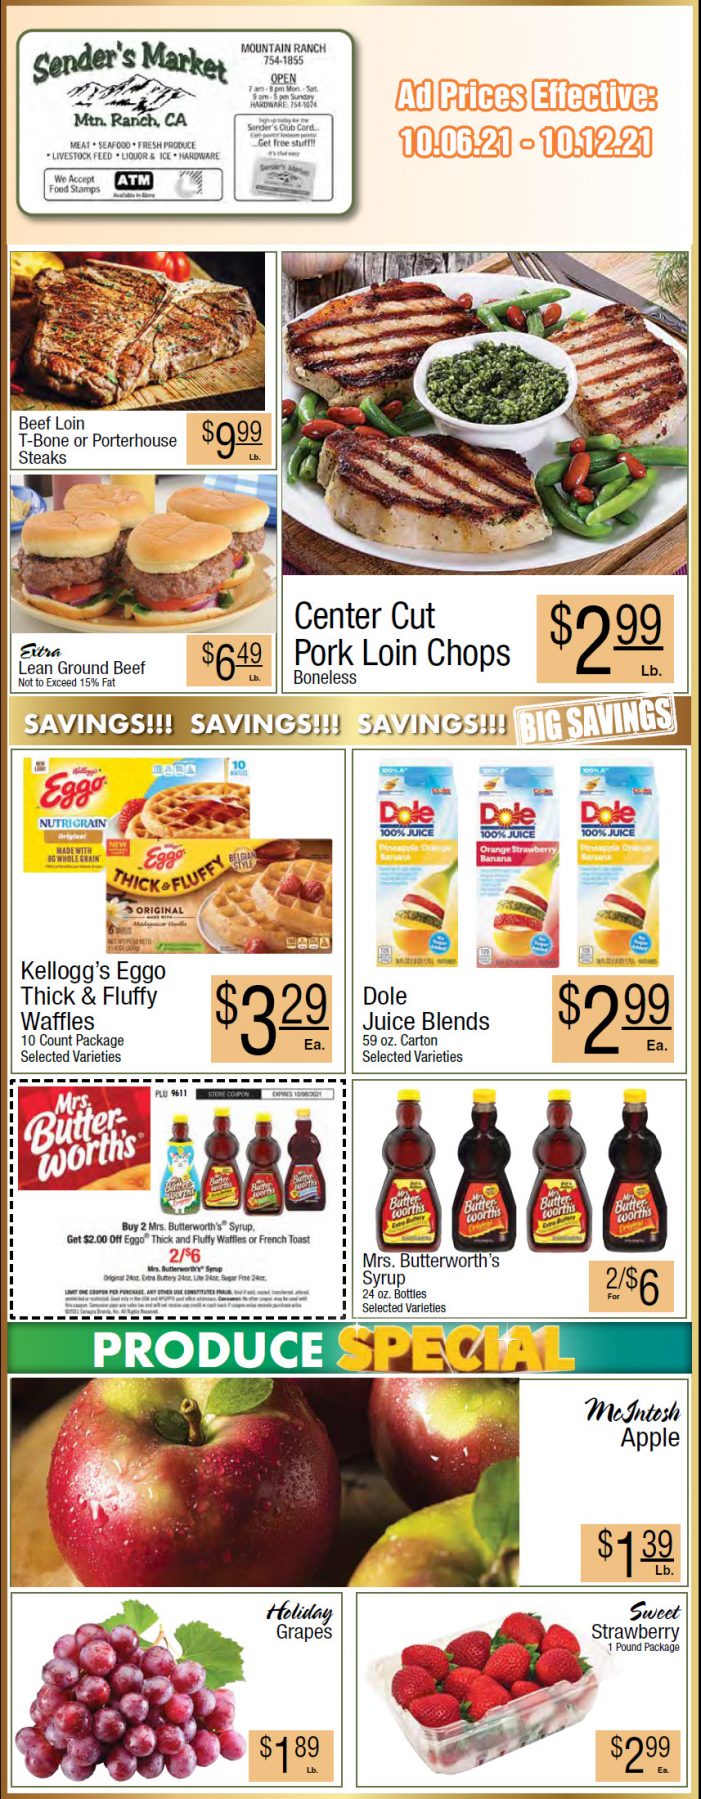 Sender’s Market’s Weekly Ad & Grocery Specials Through October 5th! Shop Local & Save!